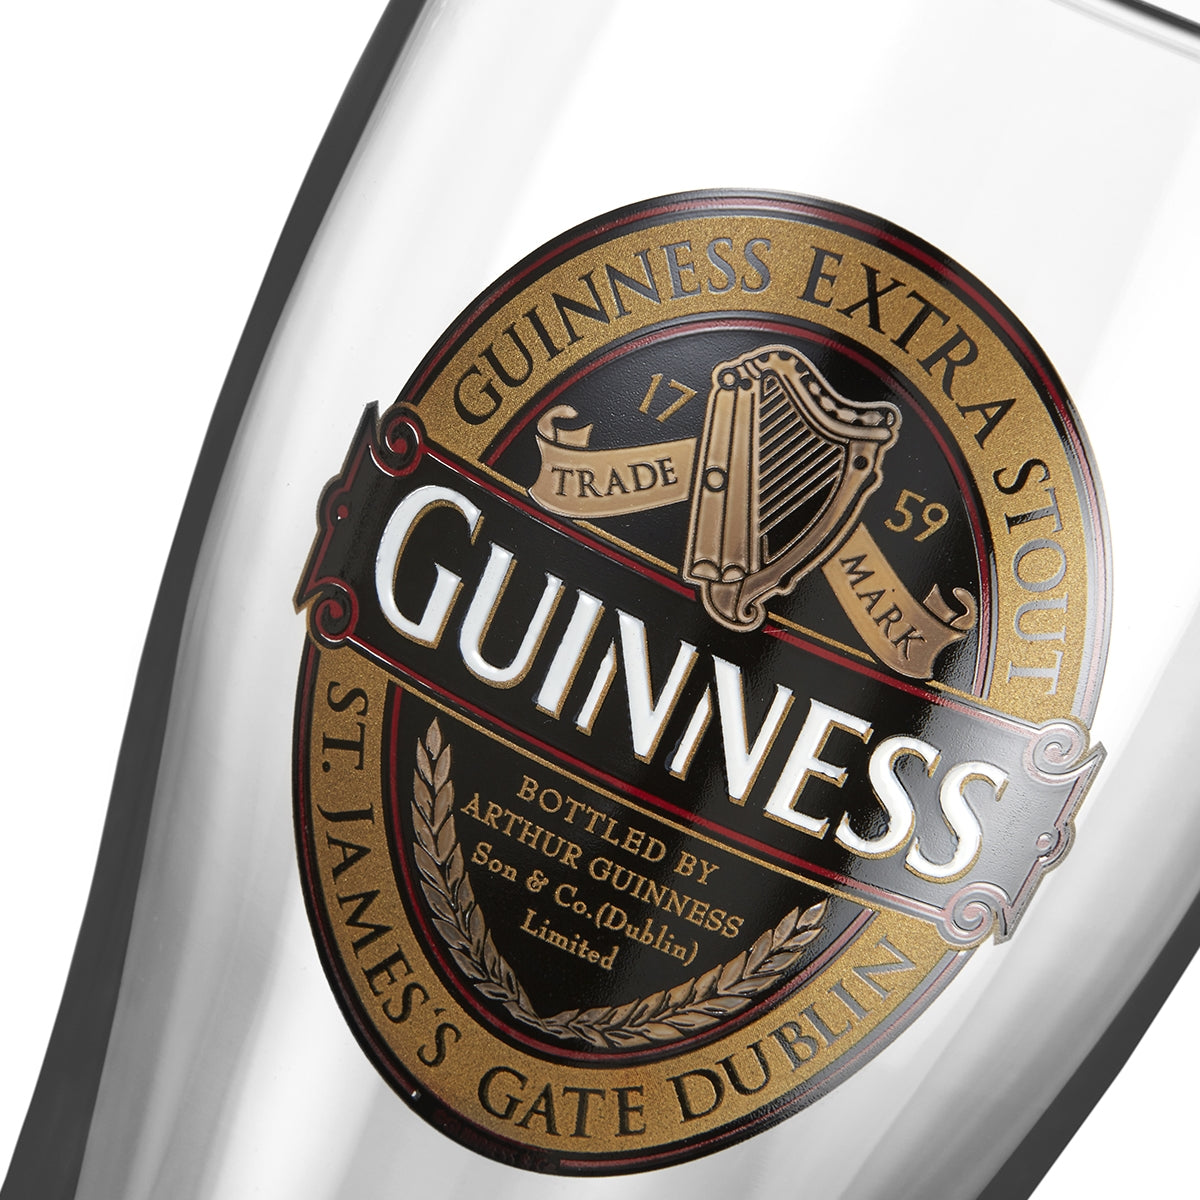 Guinness Classic Pint Glass 24 Pack with the Guinness brand logo.